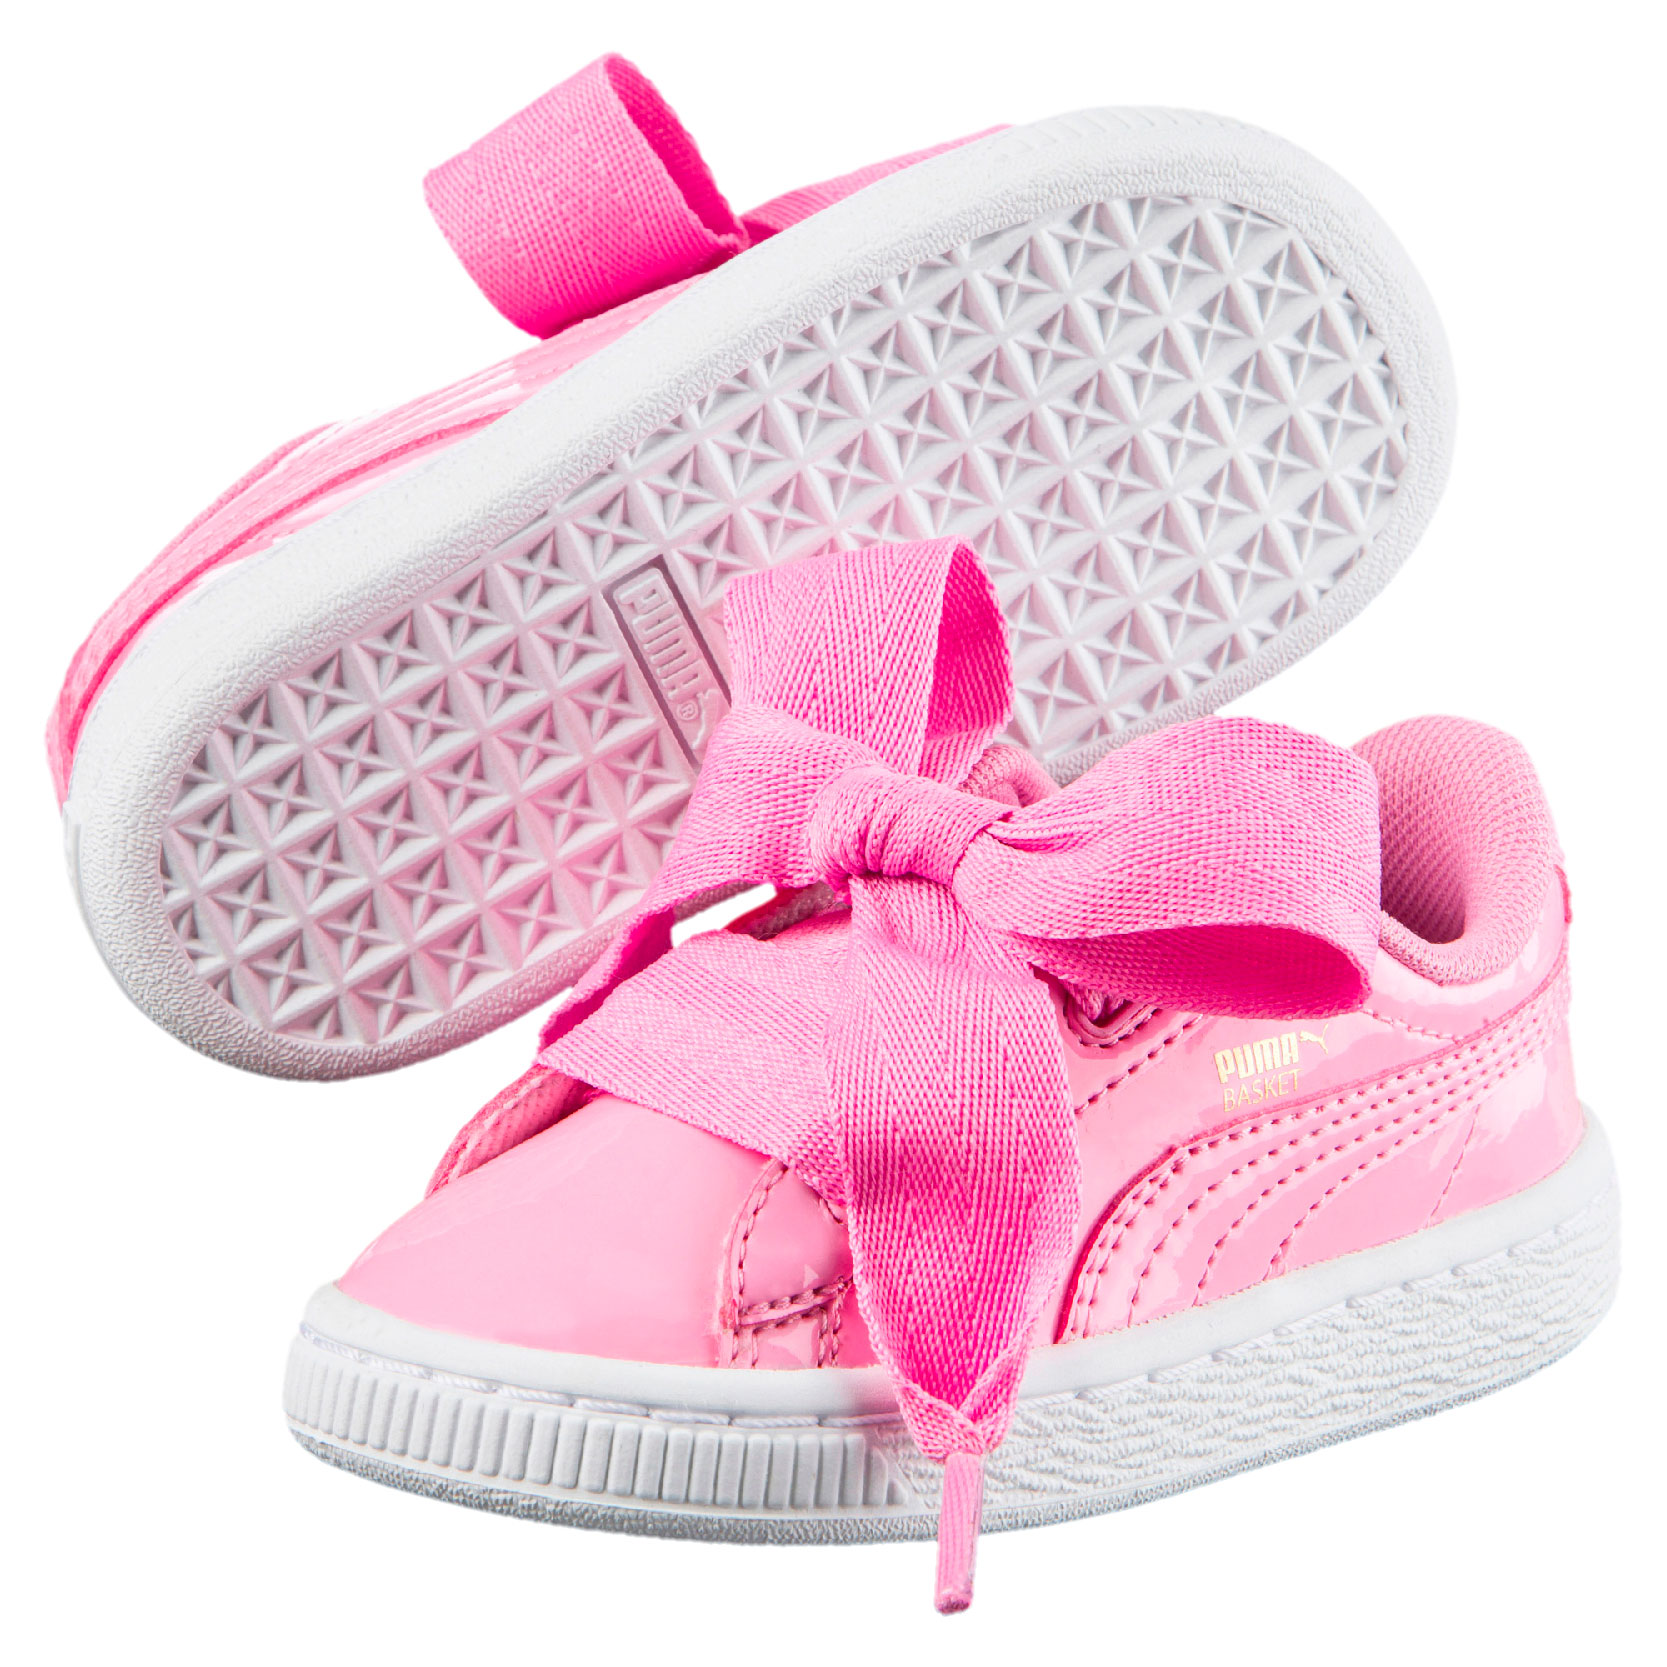 Puma Basket Heart Patent PS Footwe (end 